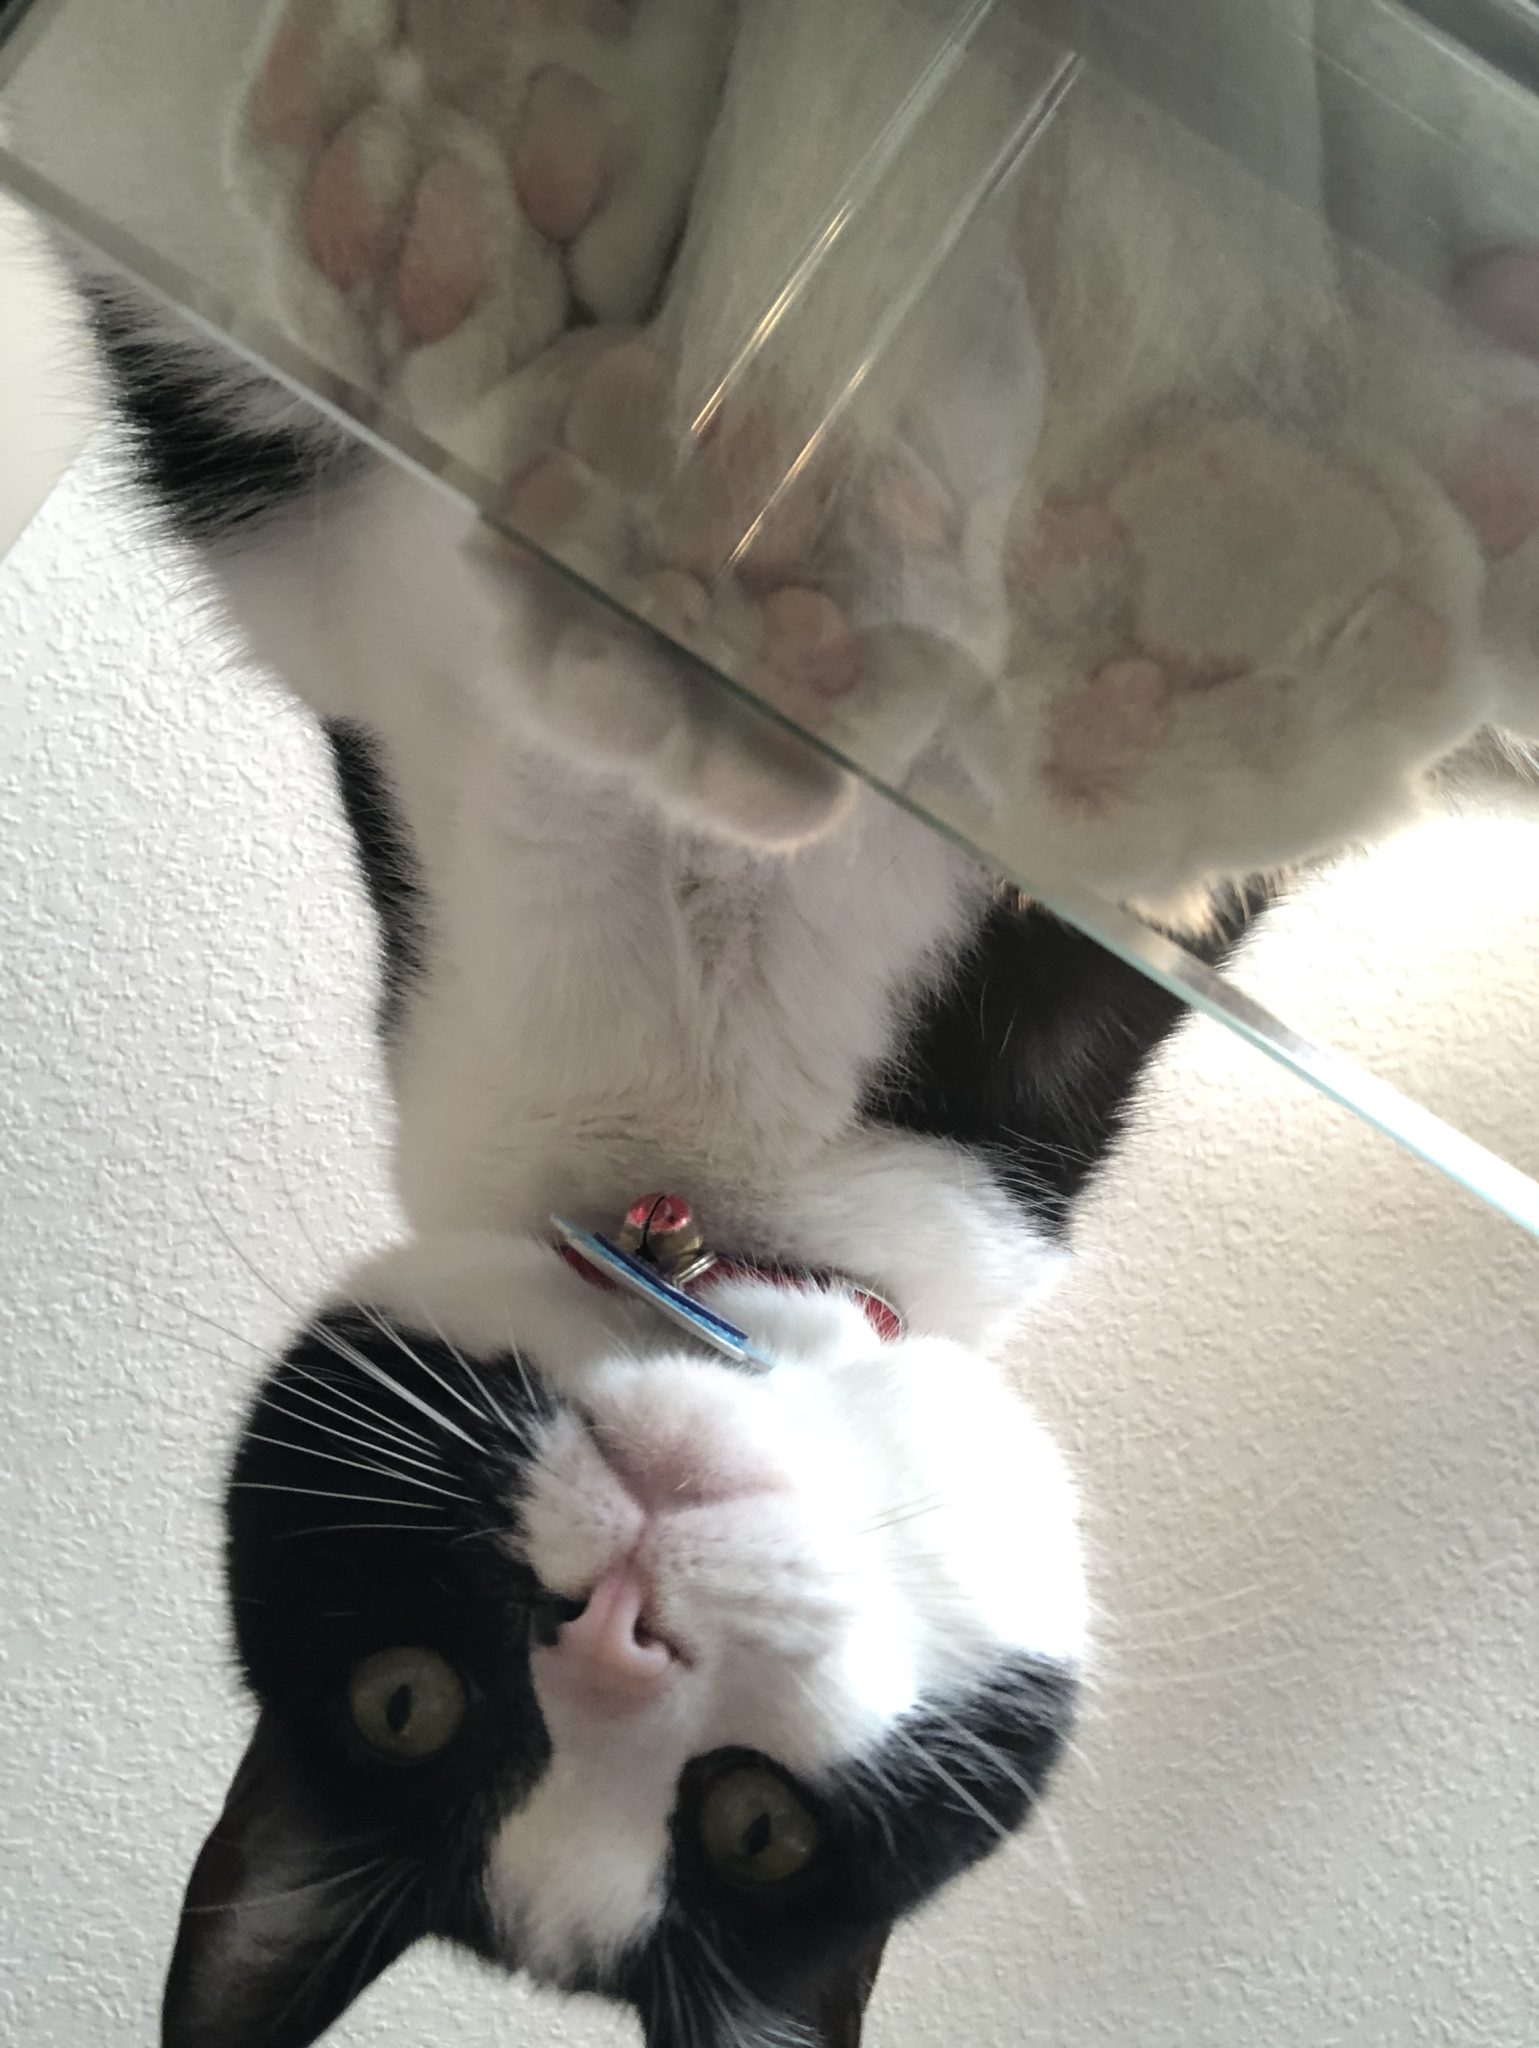 Cat looking down while standing on a glass table.